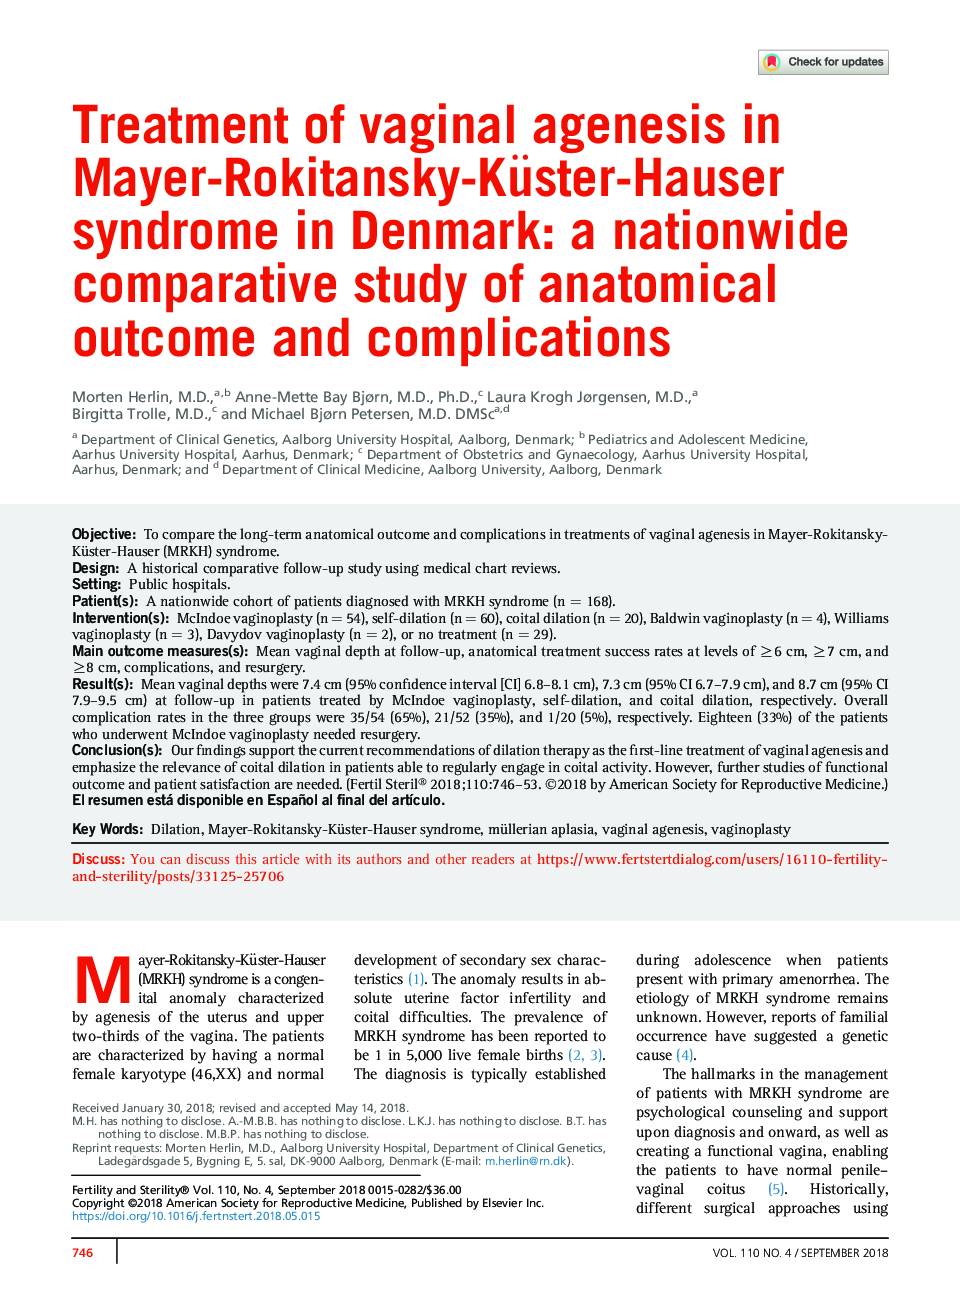 Treatment of vaginal agenesis in Mayer-Rokitansky-Küster-Hauser syndrome in Denmark: a nationwide comparative study of anatomical outcome and complications